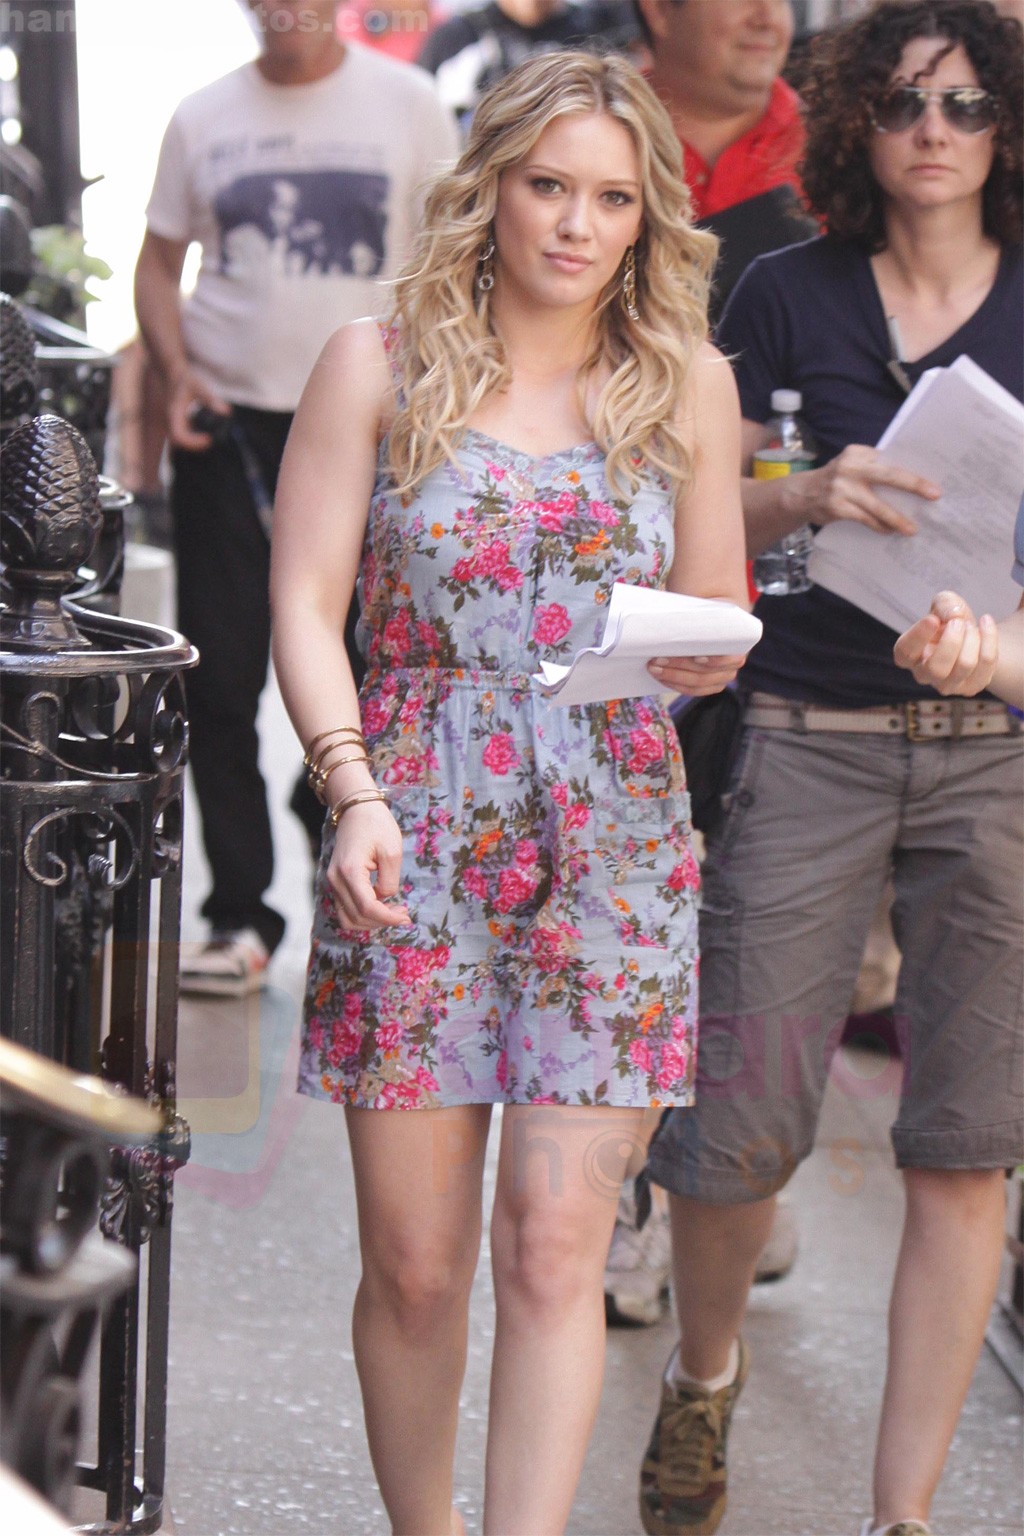 Hilary Duff On The Set Of GOSSIP GIRL in New York City on 26th August 2009 